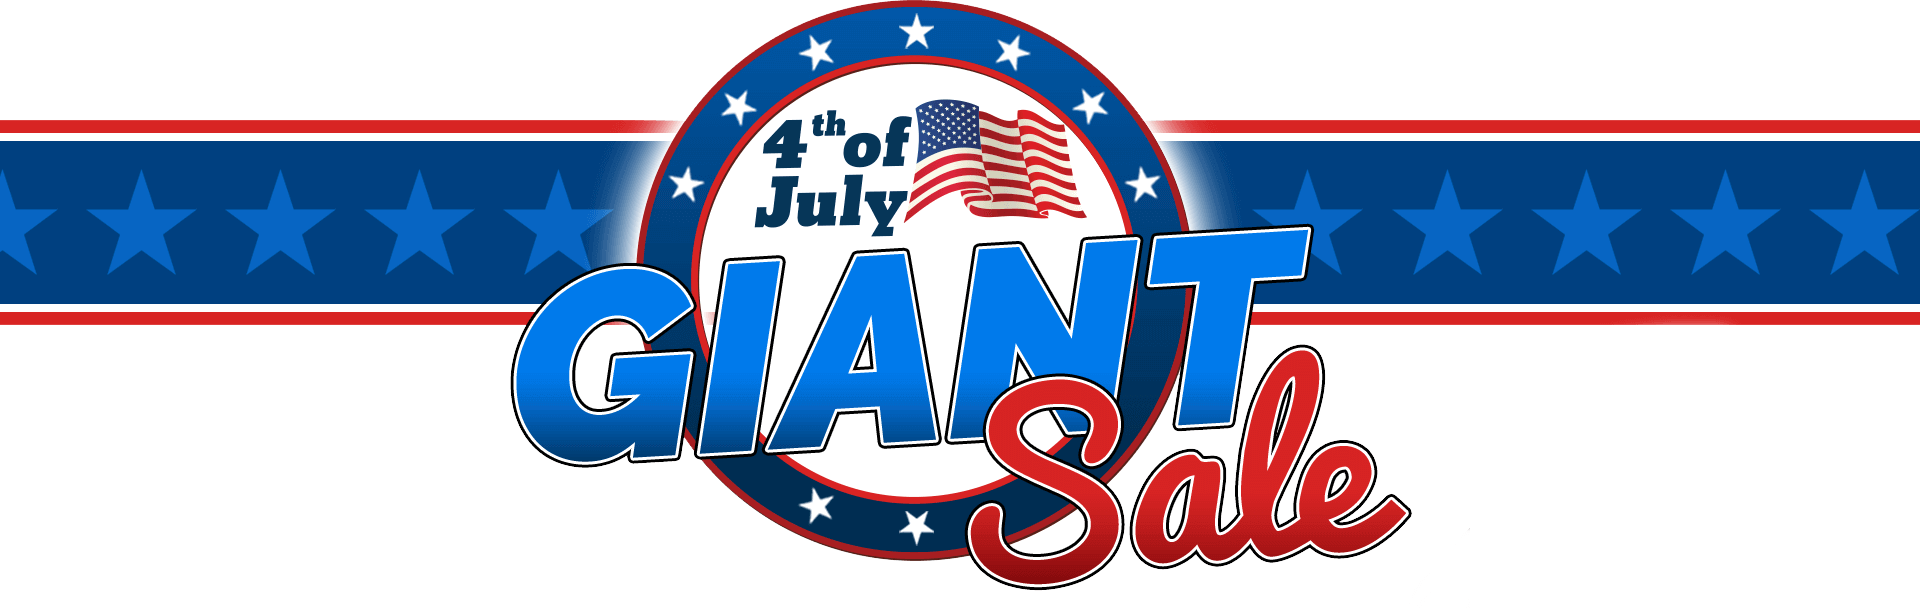 Download Santa Paula Chevrolet 4th Of July Sale Png PNG Image with No